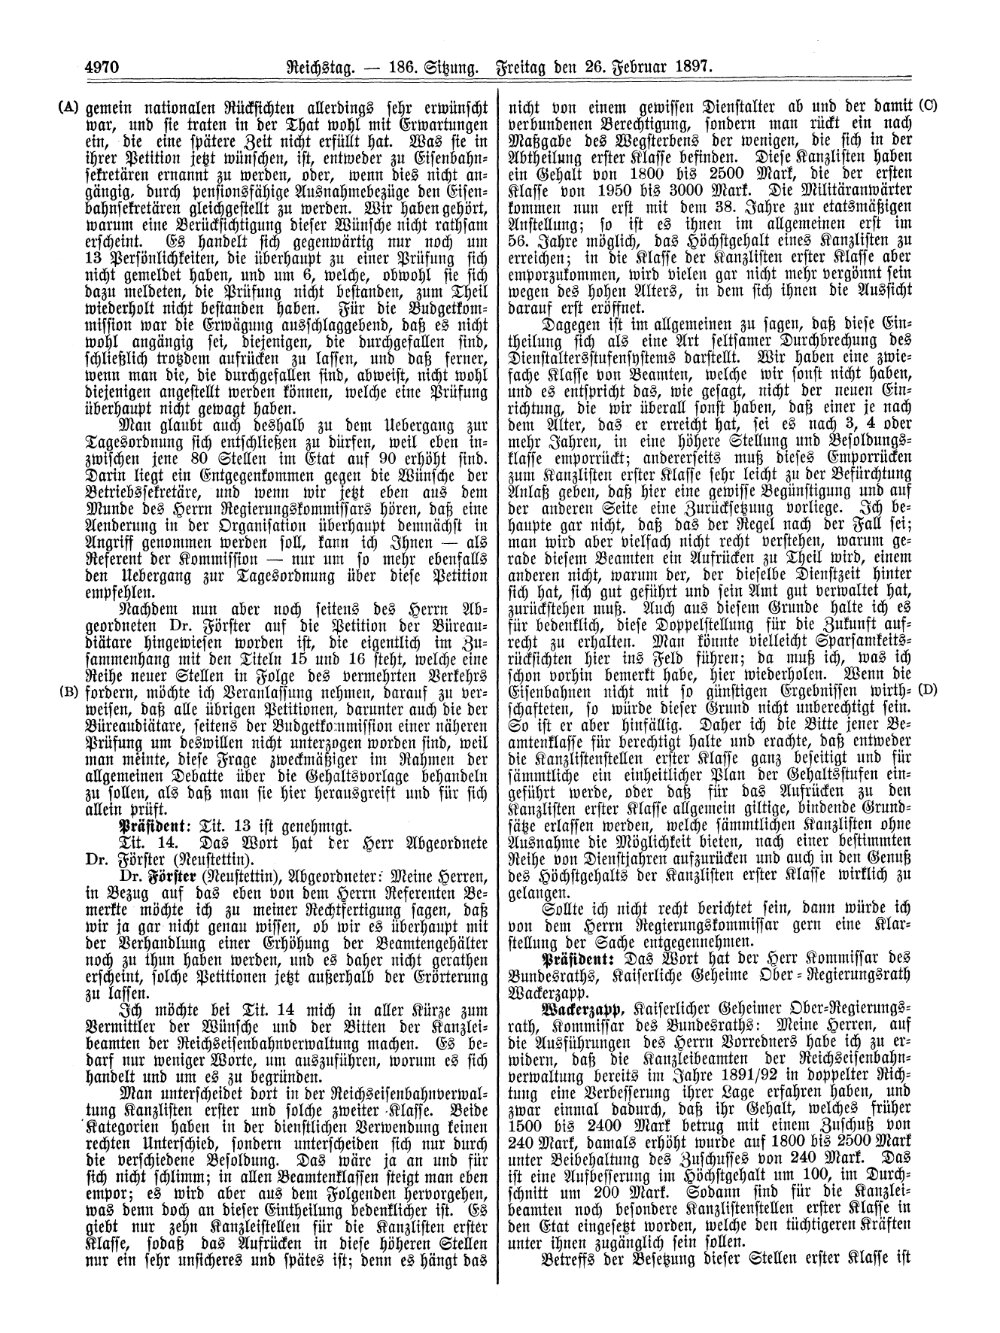 Scan of page 4970